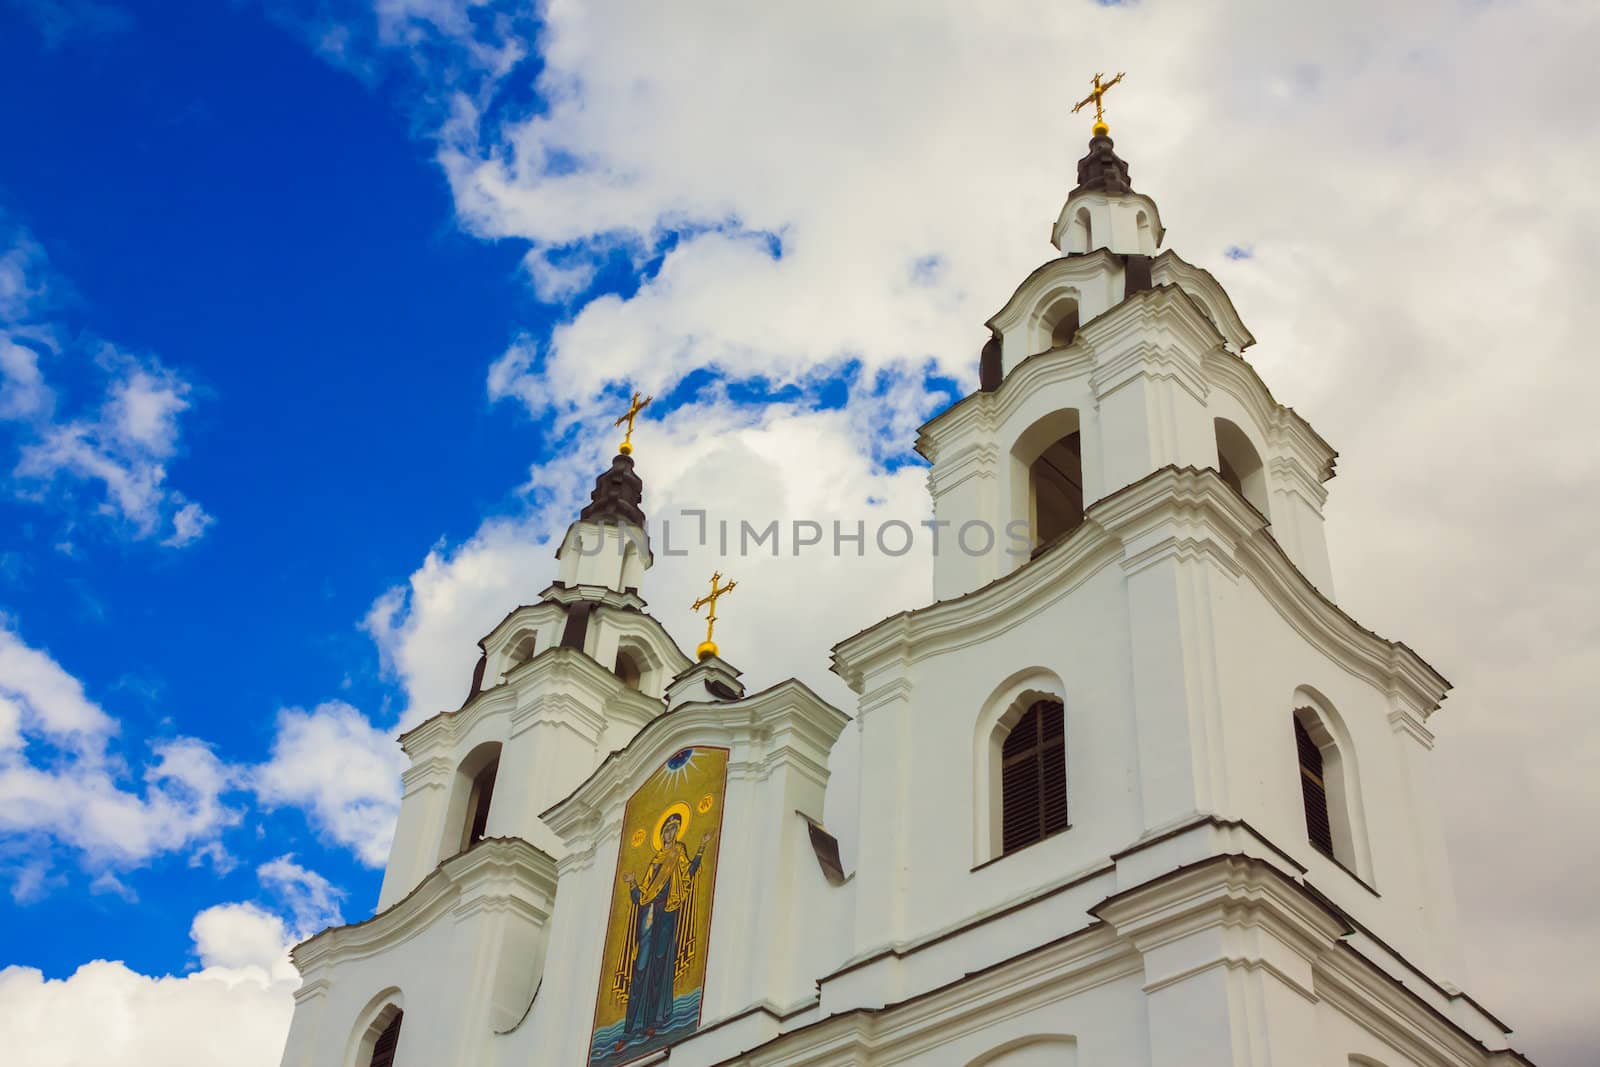 Golden Dome Of The Orthodox Church In Central Russia On The Blue Sky Background